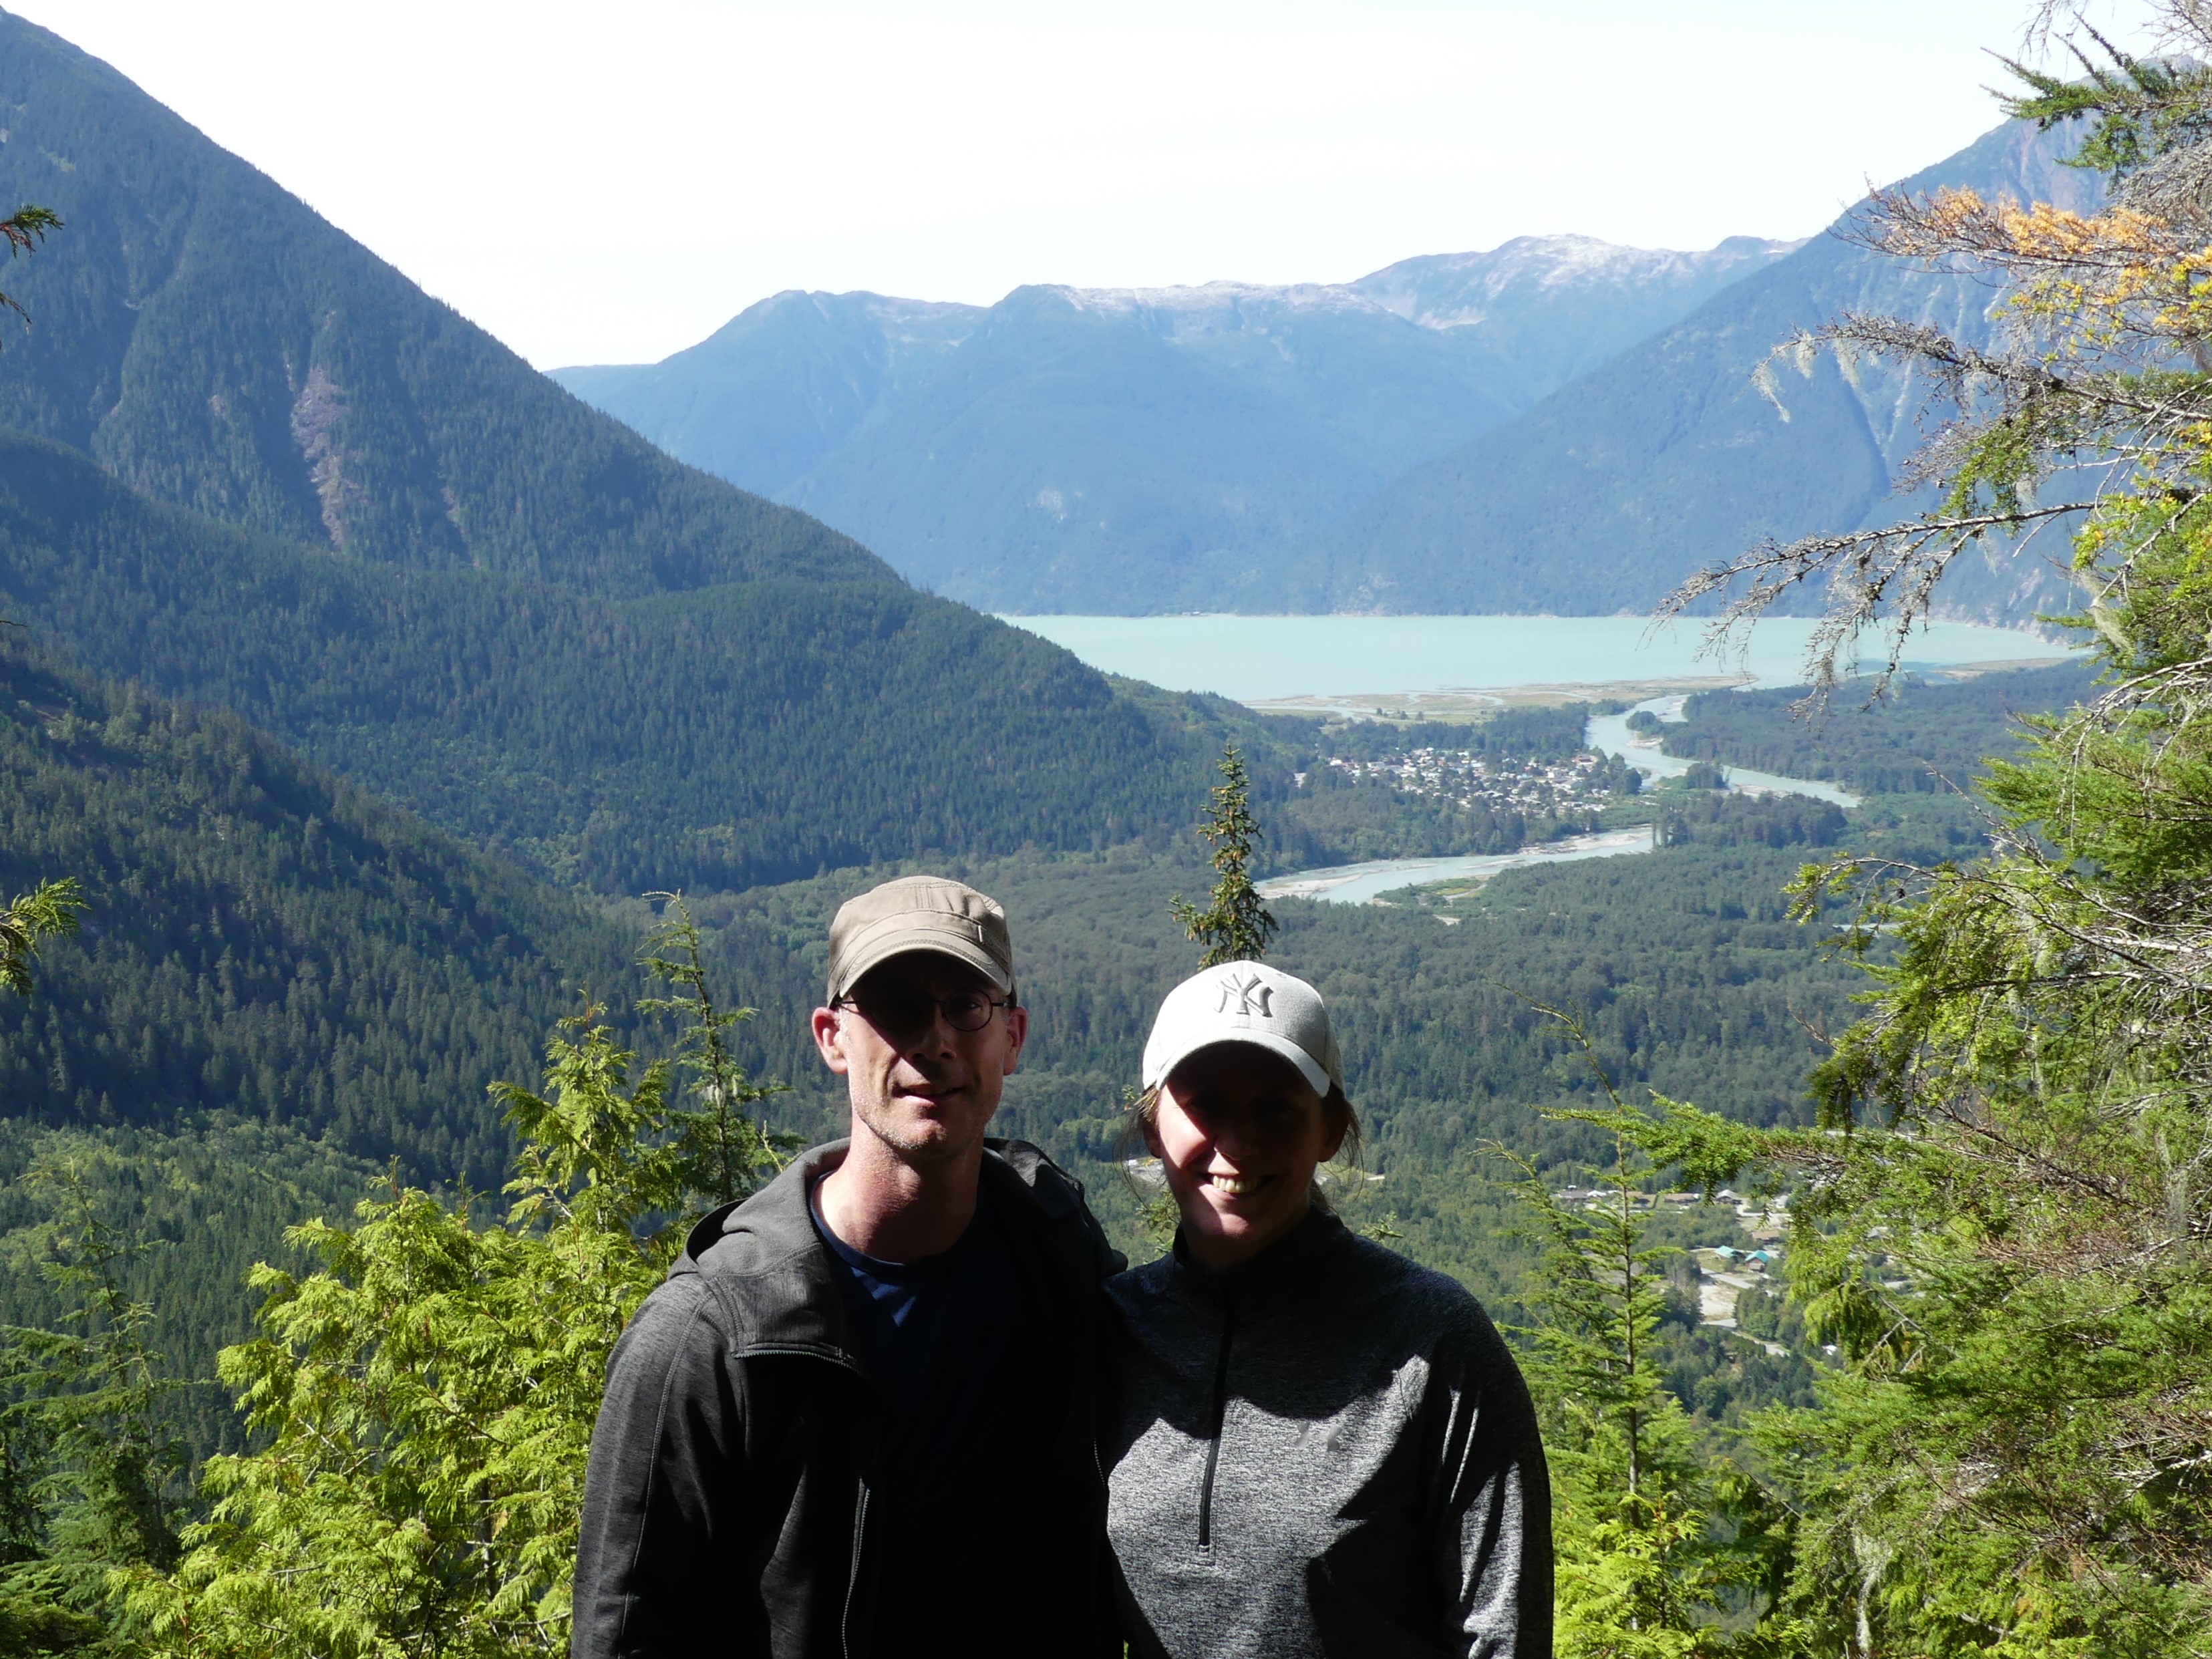 James D. McEwan and his wife with the lush Bella Coola valley in the background